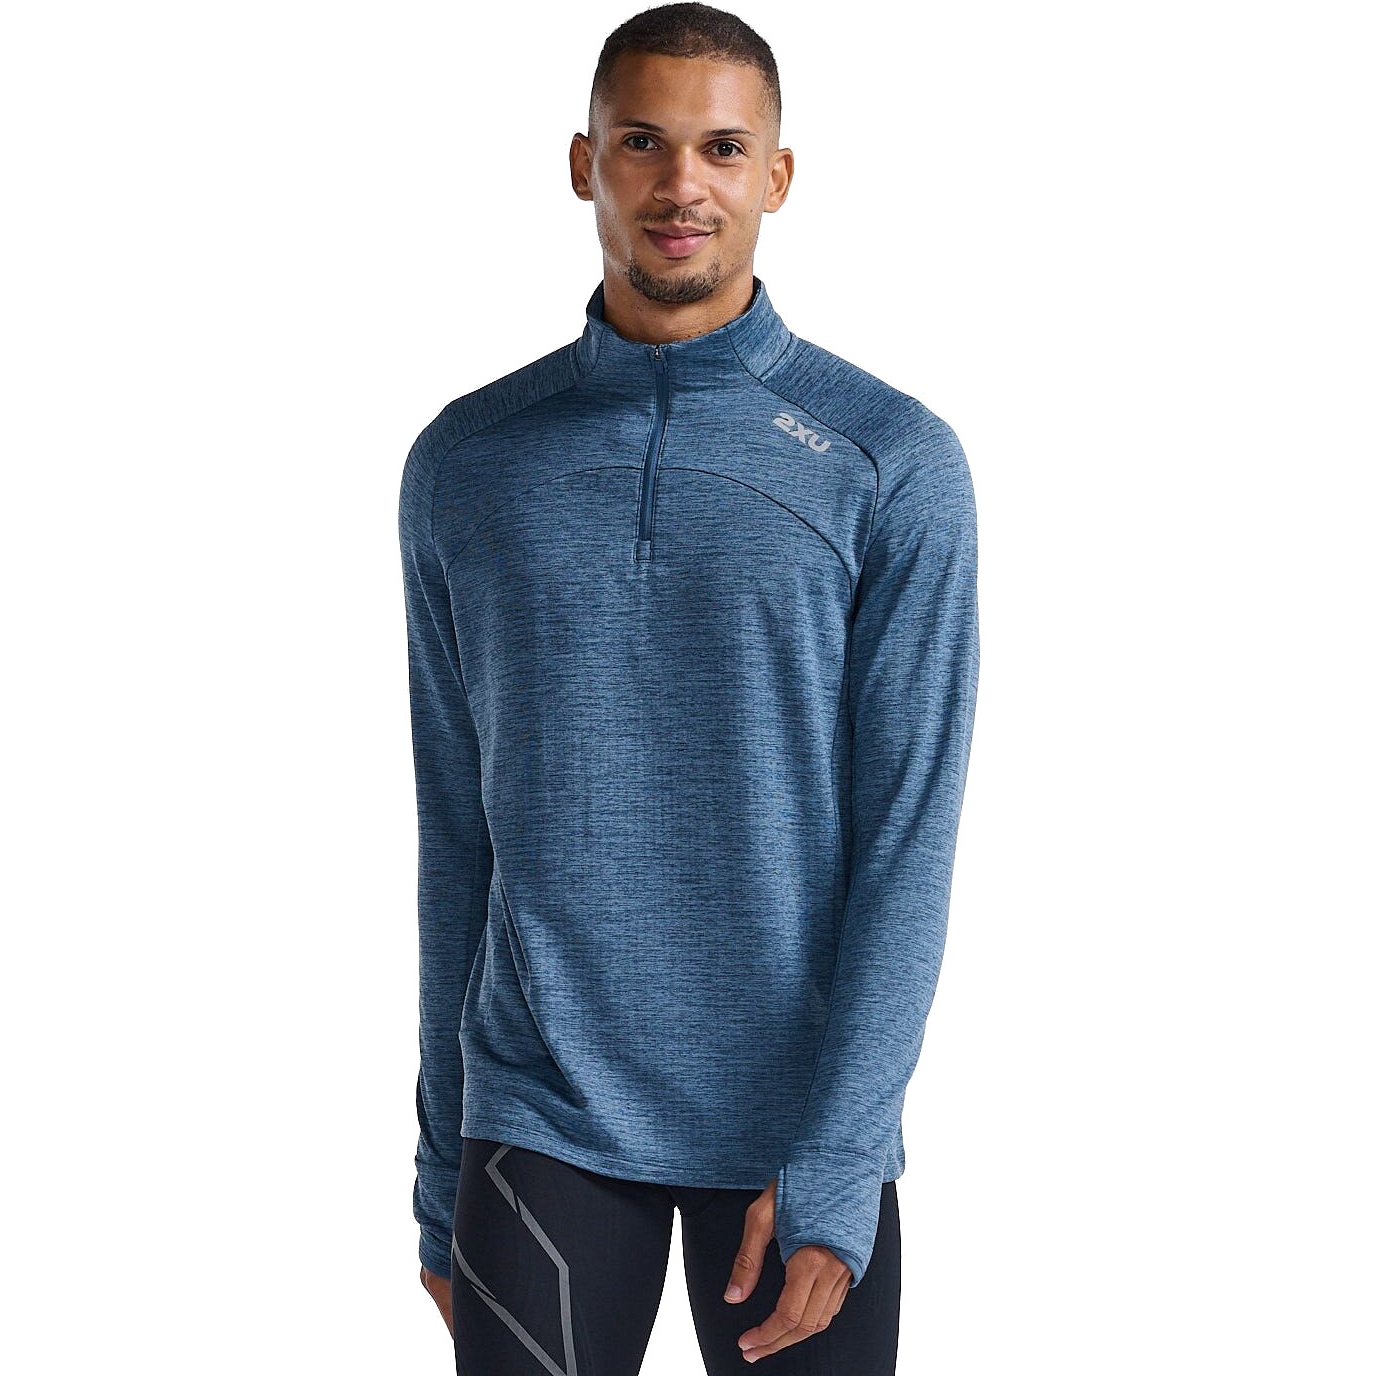 Photo produit de 2XU Pullover Homme - Ignition 1/4 Zip - stormy/silver reflective